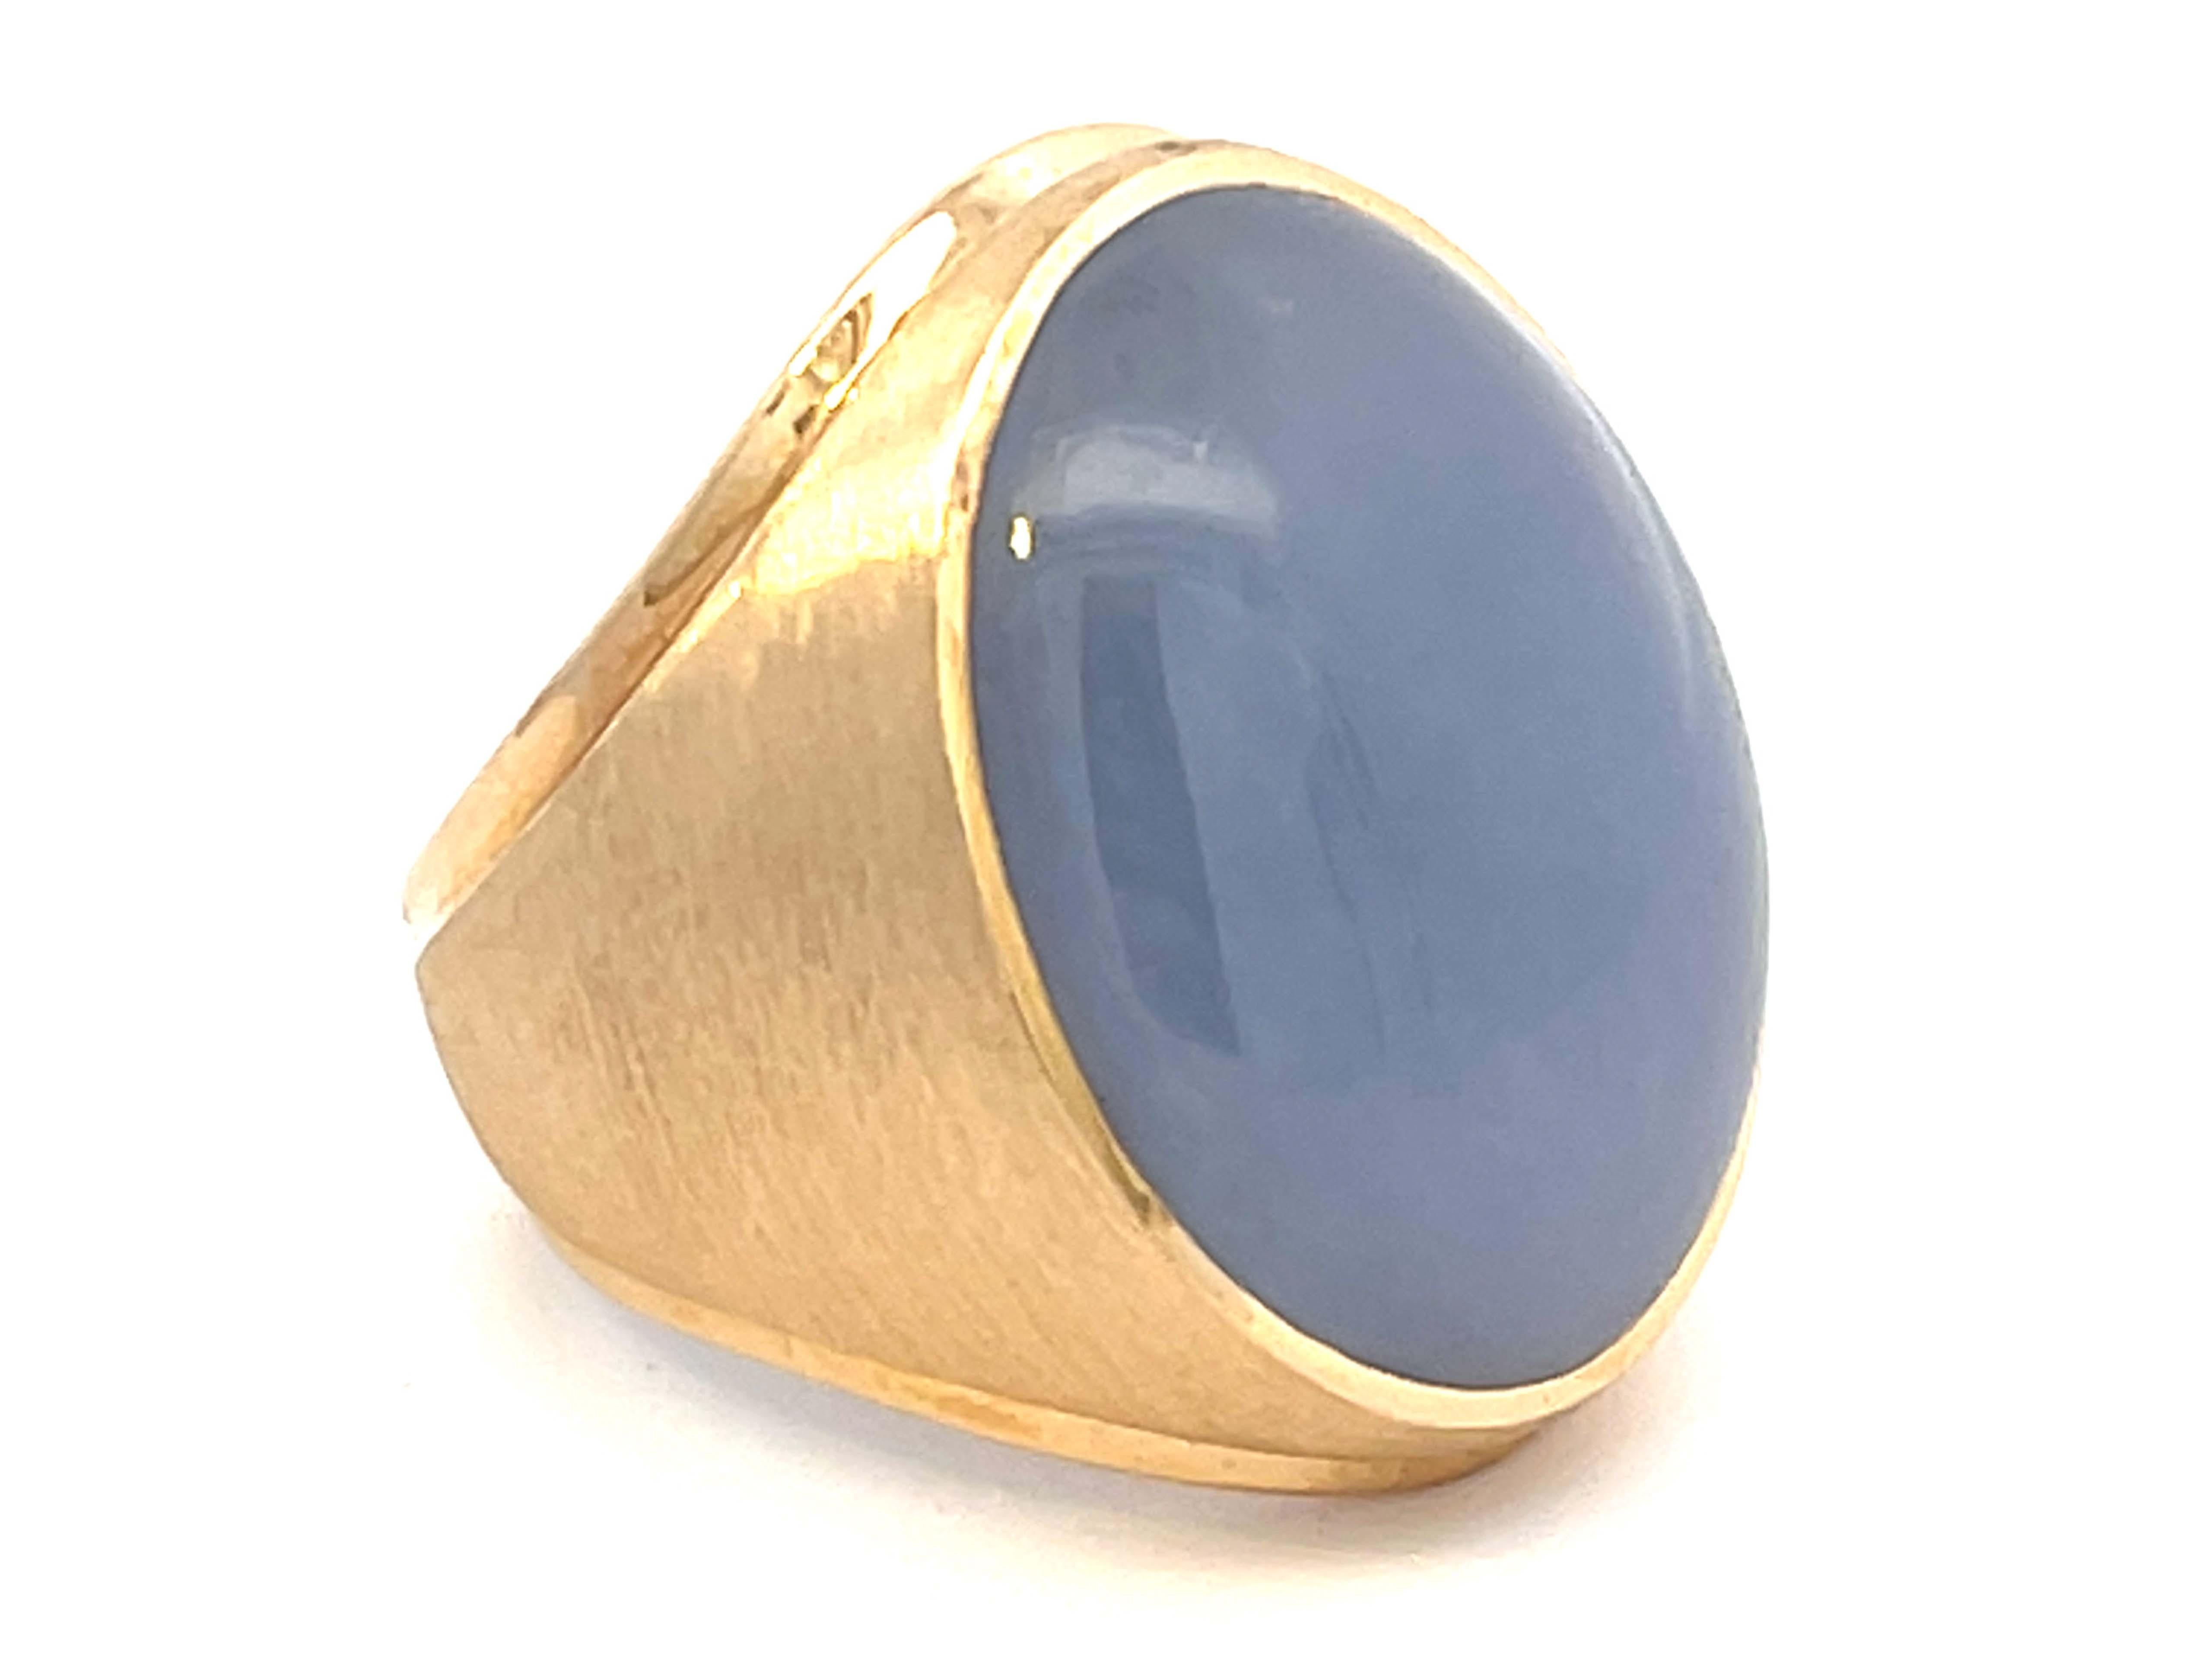 Modern Lavender Oval Cabochon Jade Ring with Satin Finish in 14k Yellow Gold